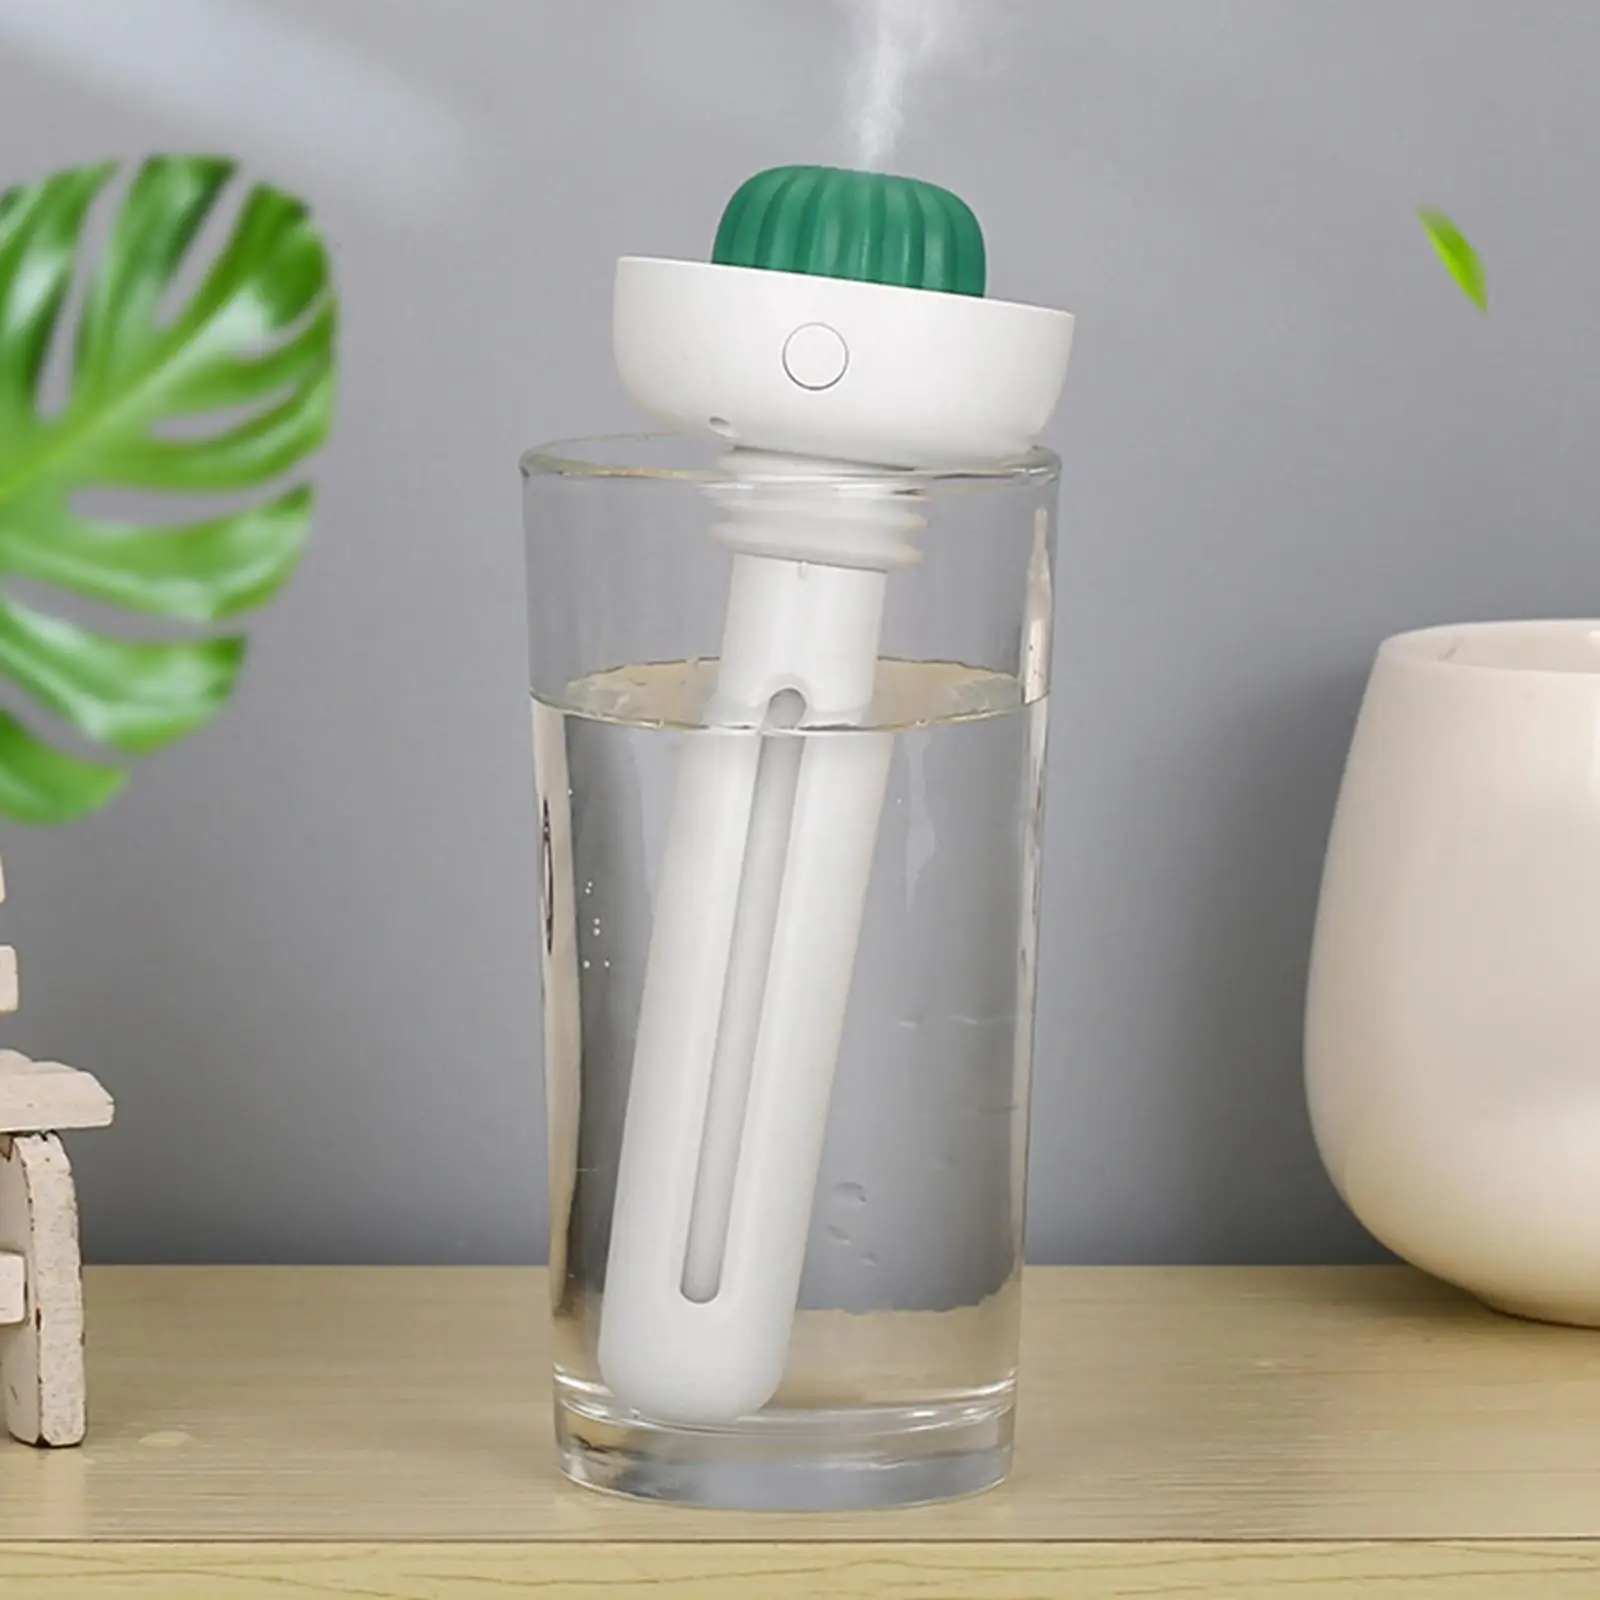 Portable Humidifier, Low Noise Cool Mist Travel Personal for Bedroom Desktop